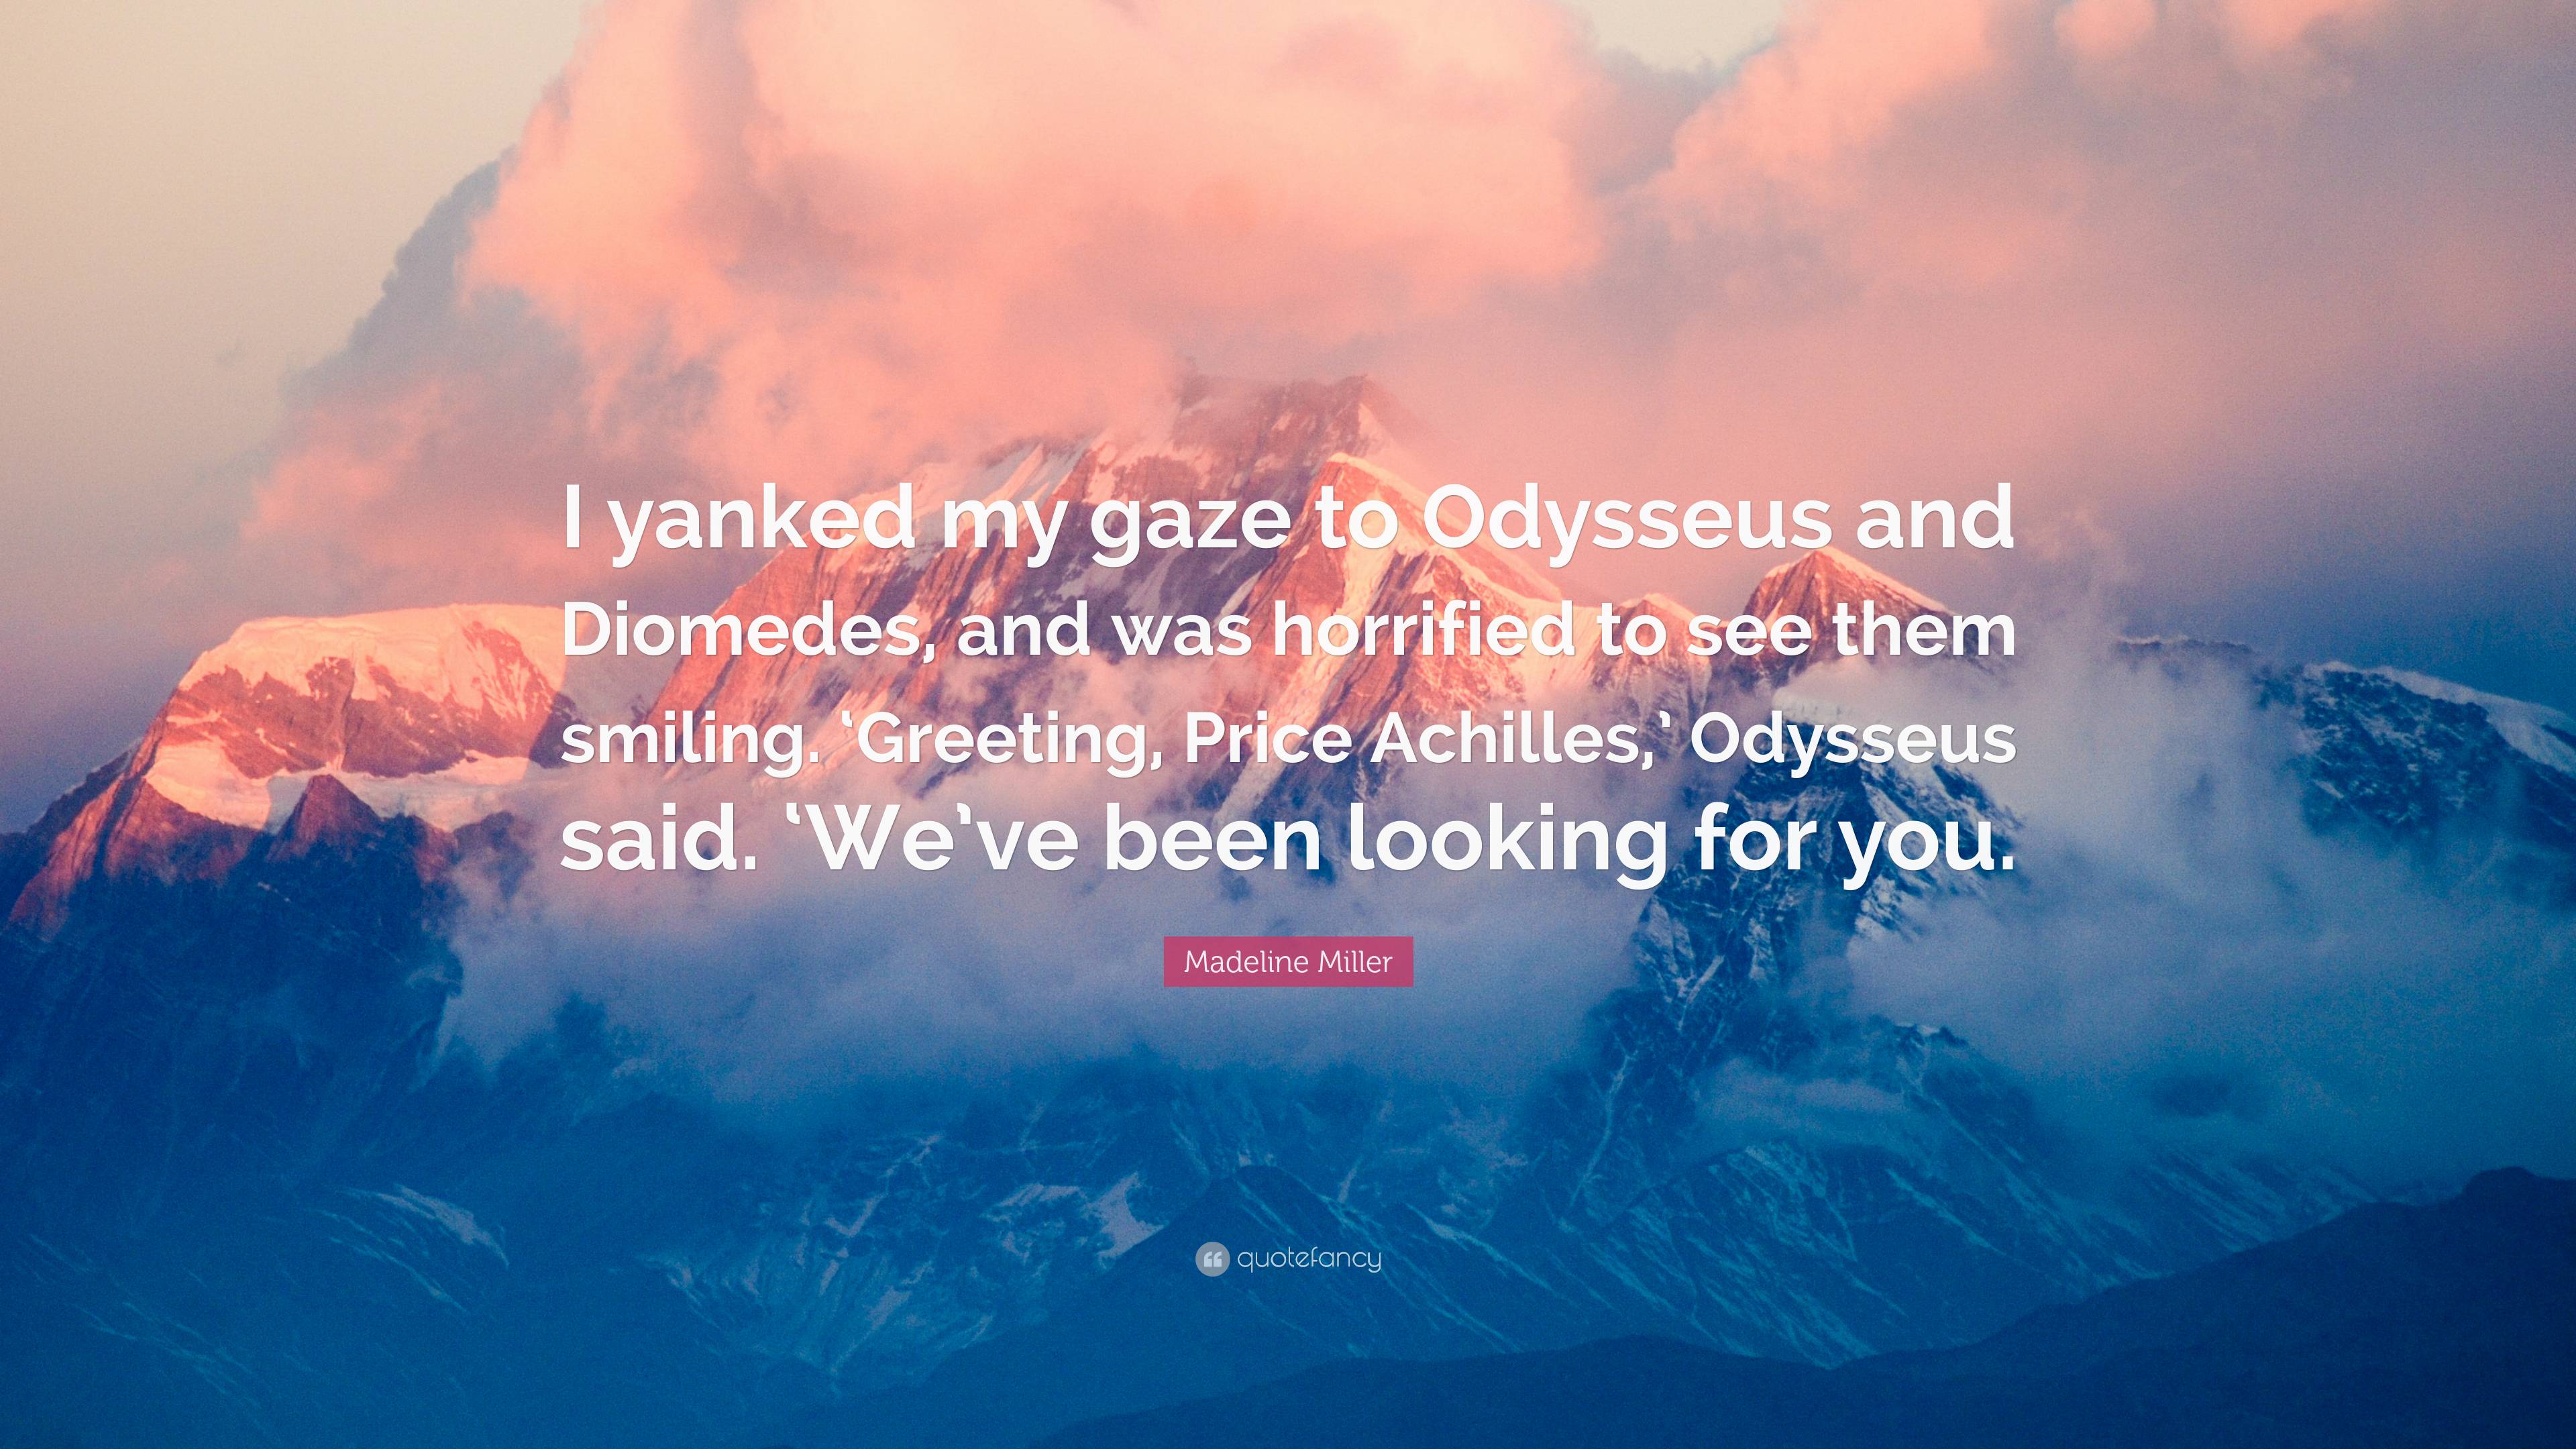 Madeline Miller Quote: “I yanked my gaze to Odysseus and Diomedes, and ...